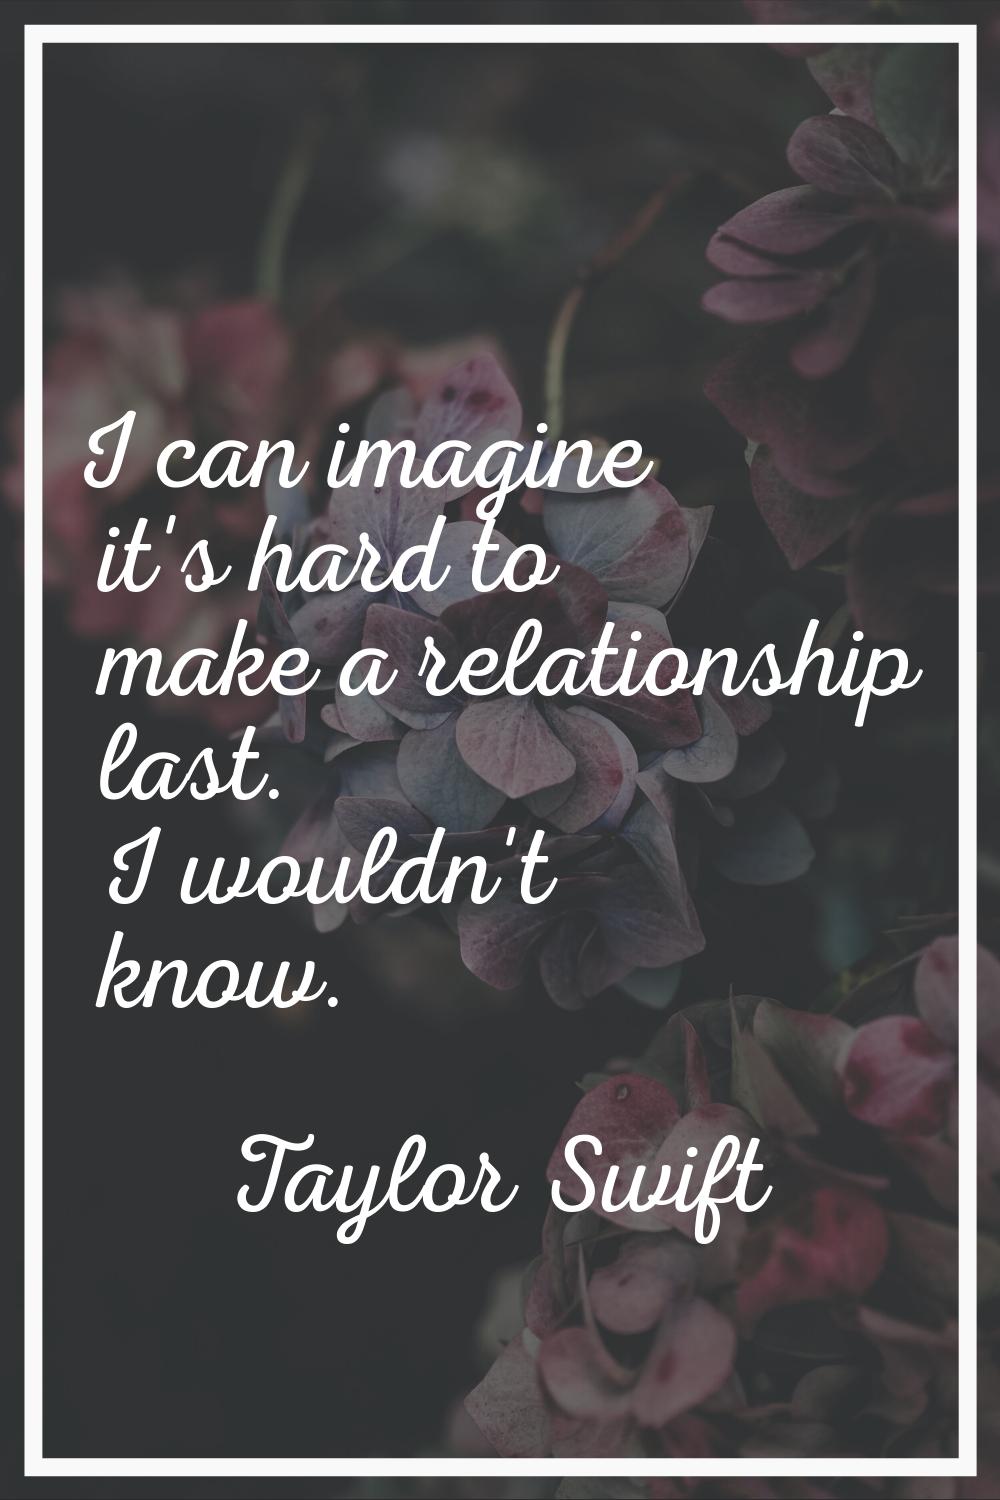 I can imagine it's hard to make a relationship last. I wouldn't know.